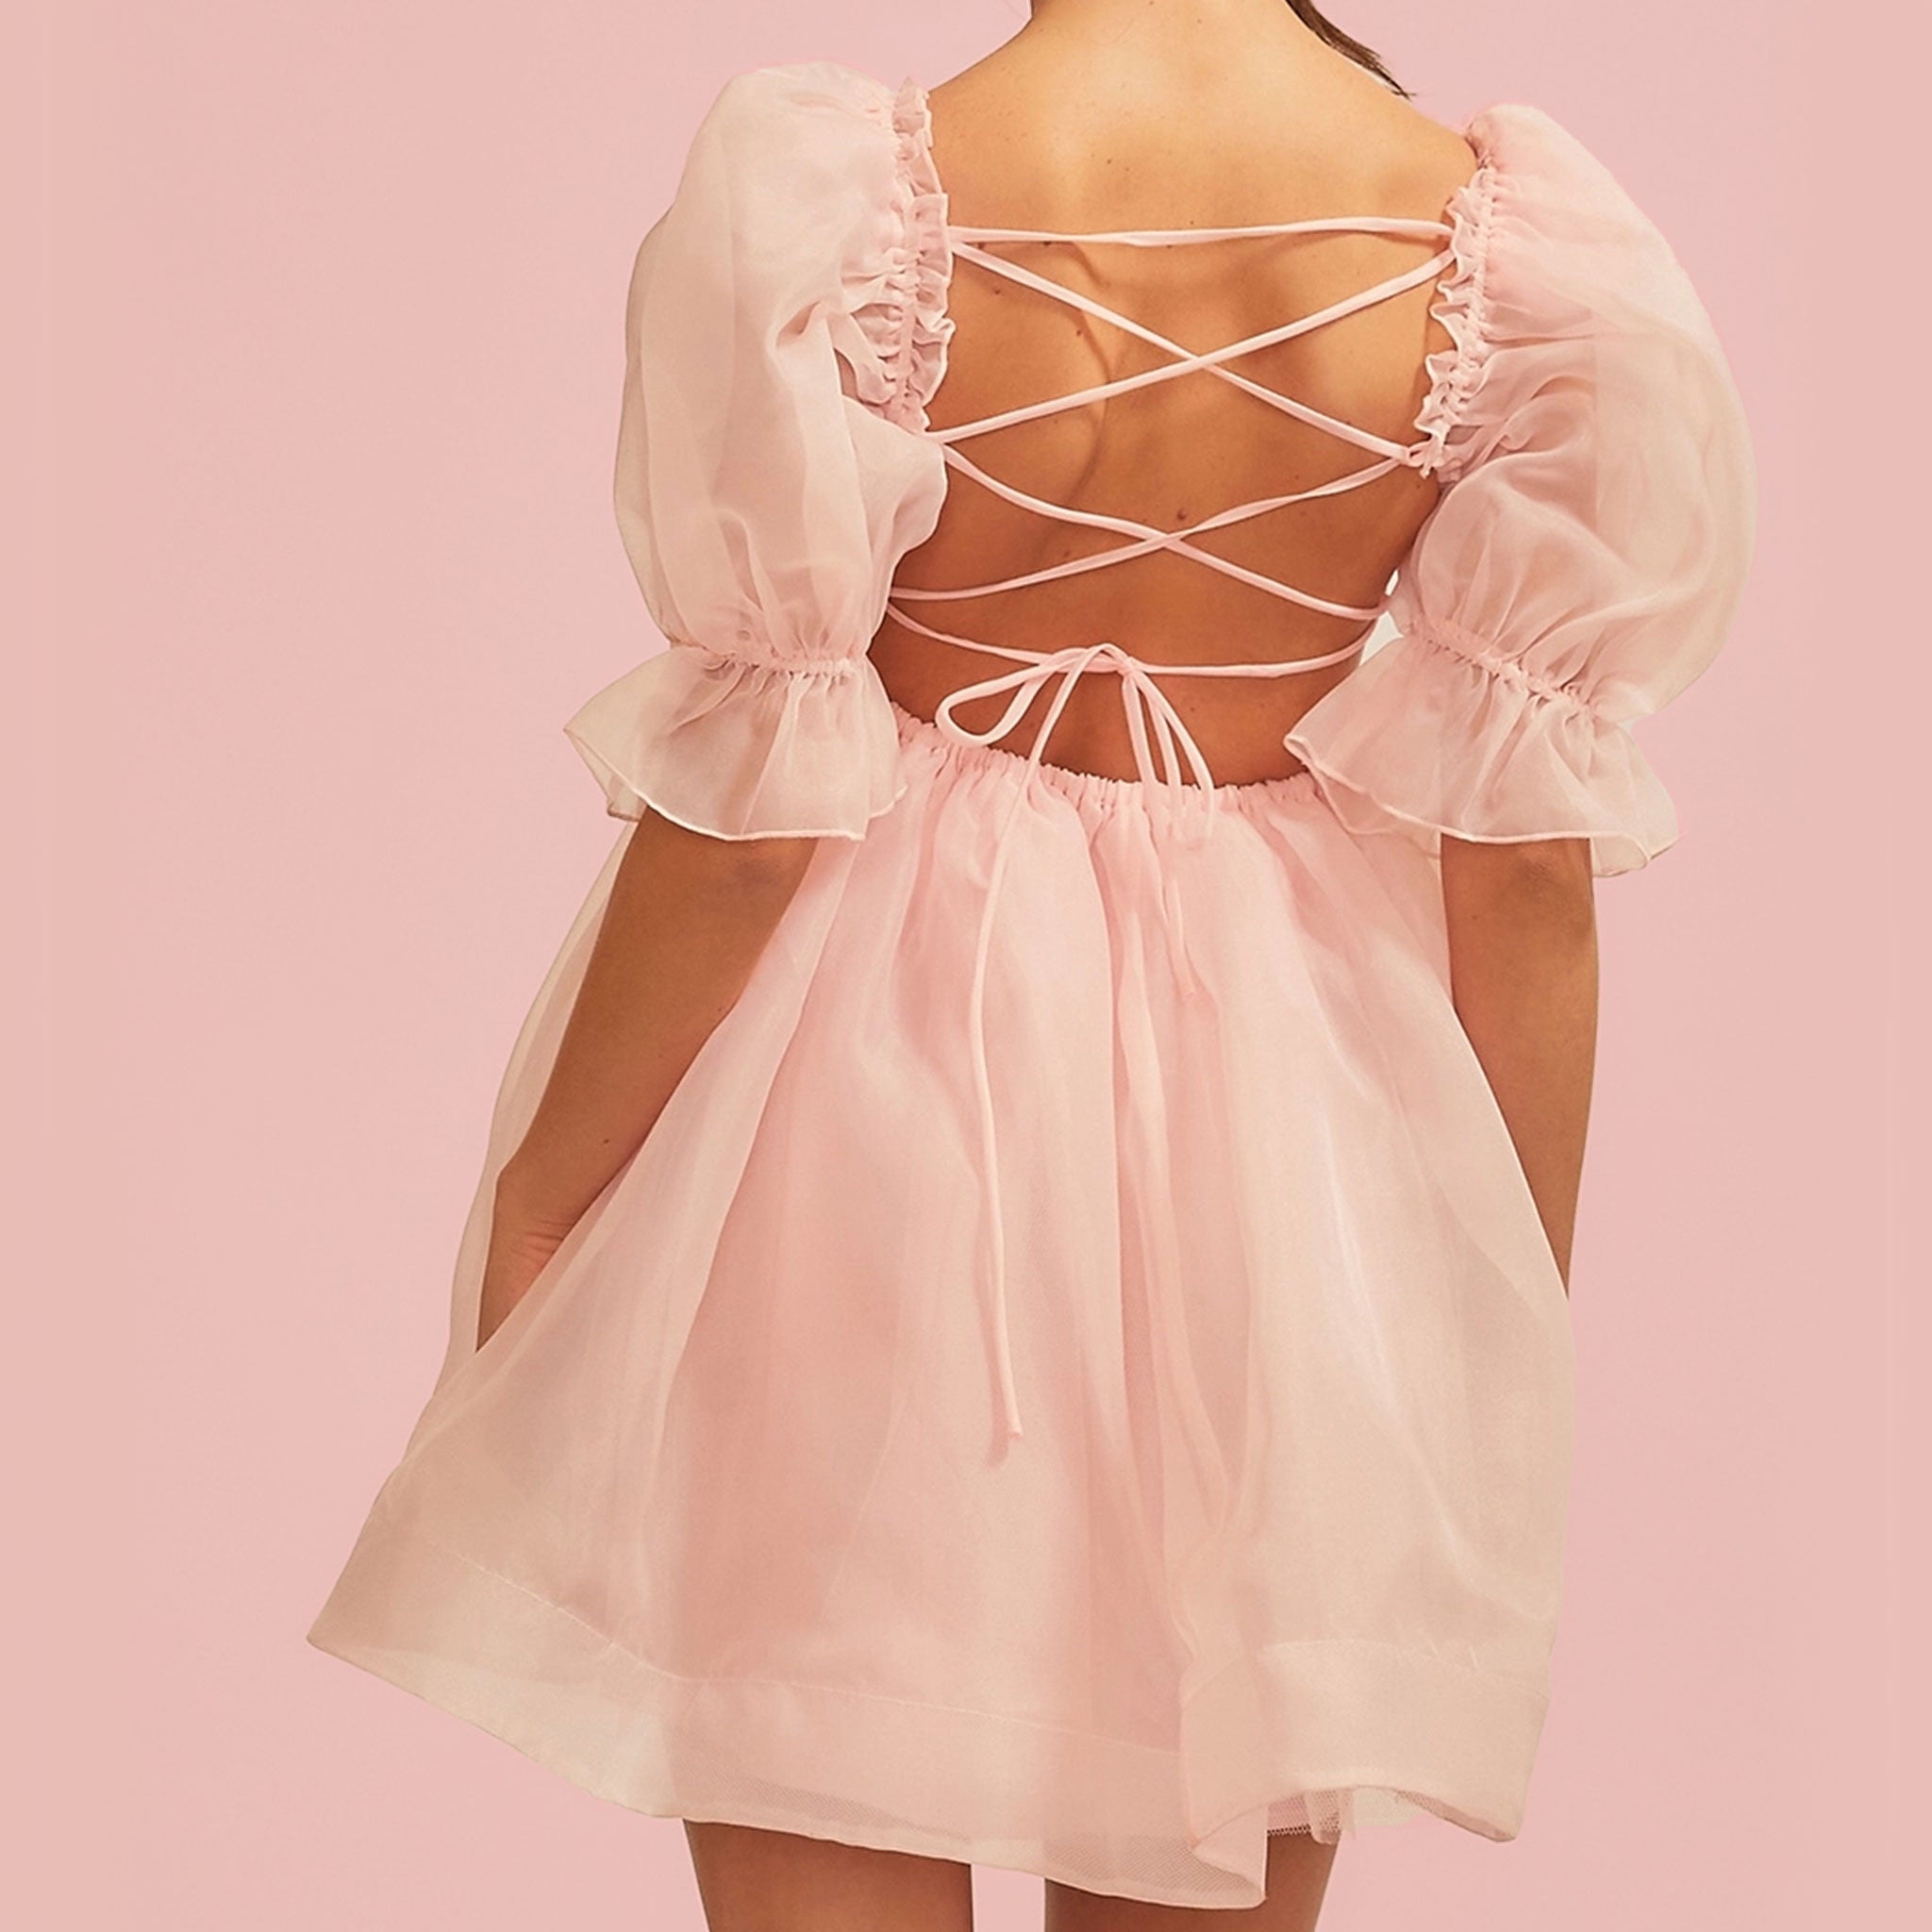 On a pink background is a model wearing a light pink puff sleeve dress with a tie up back. 